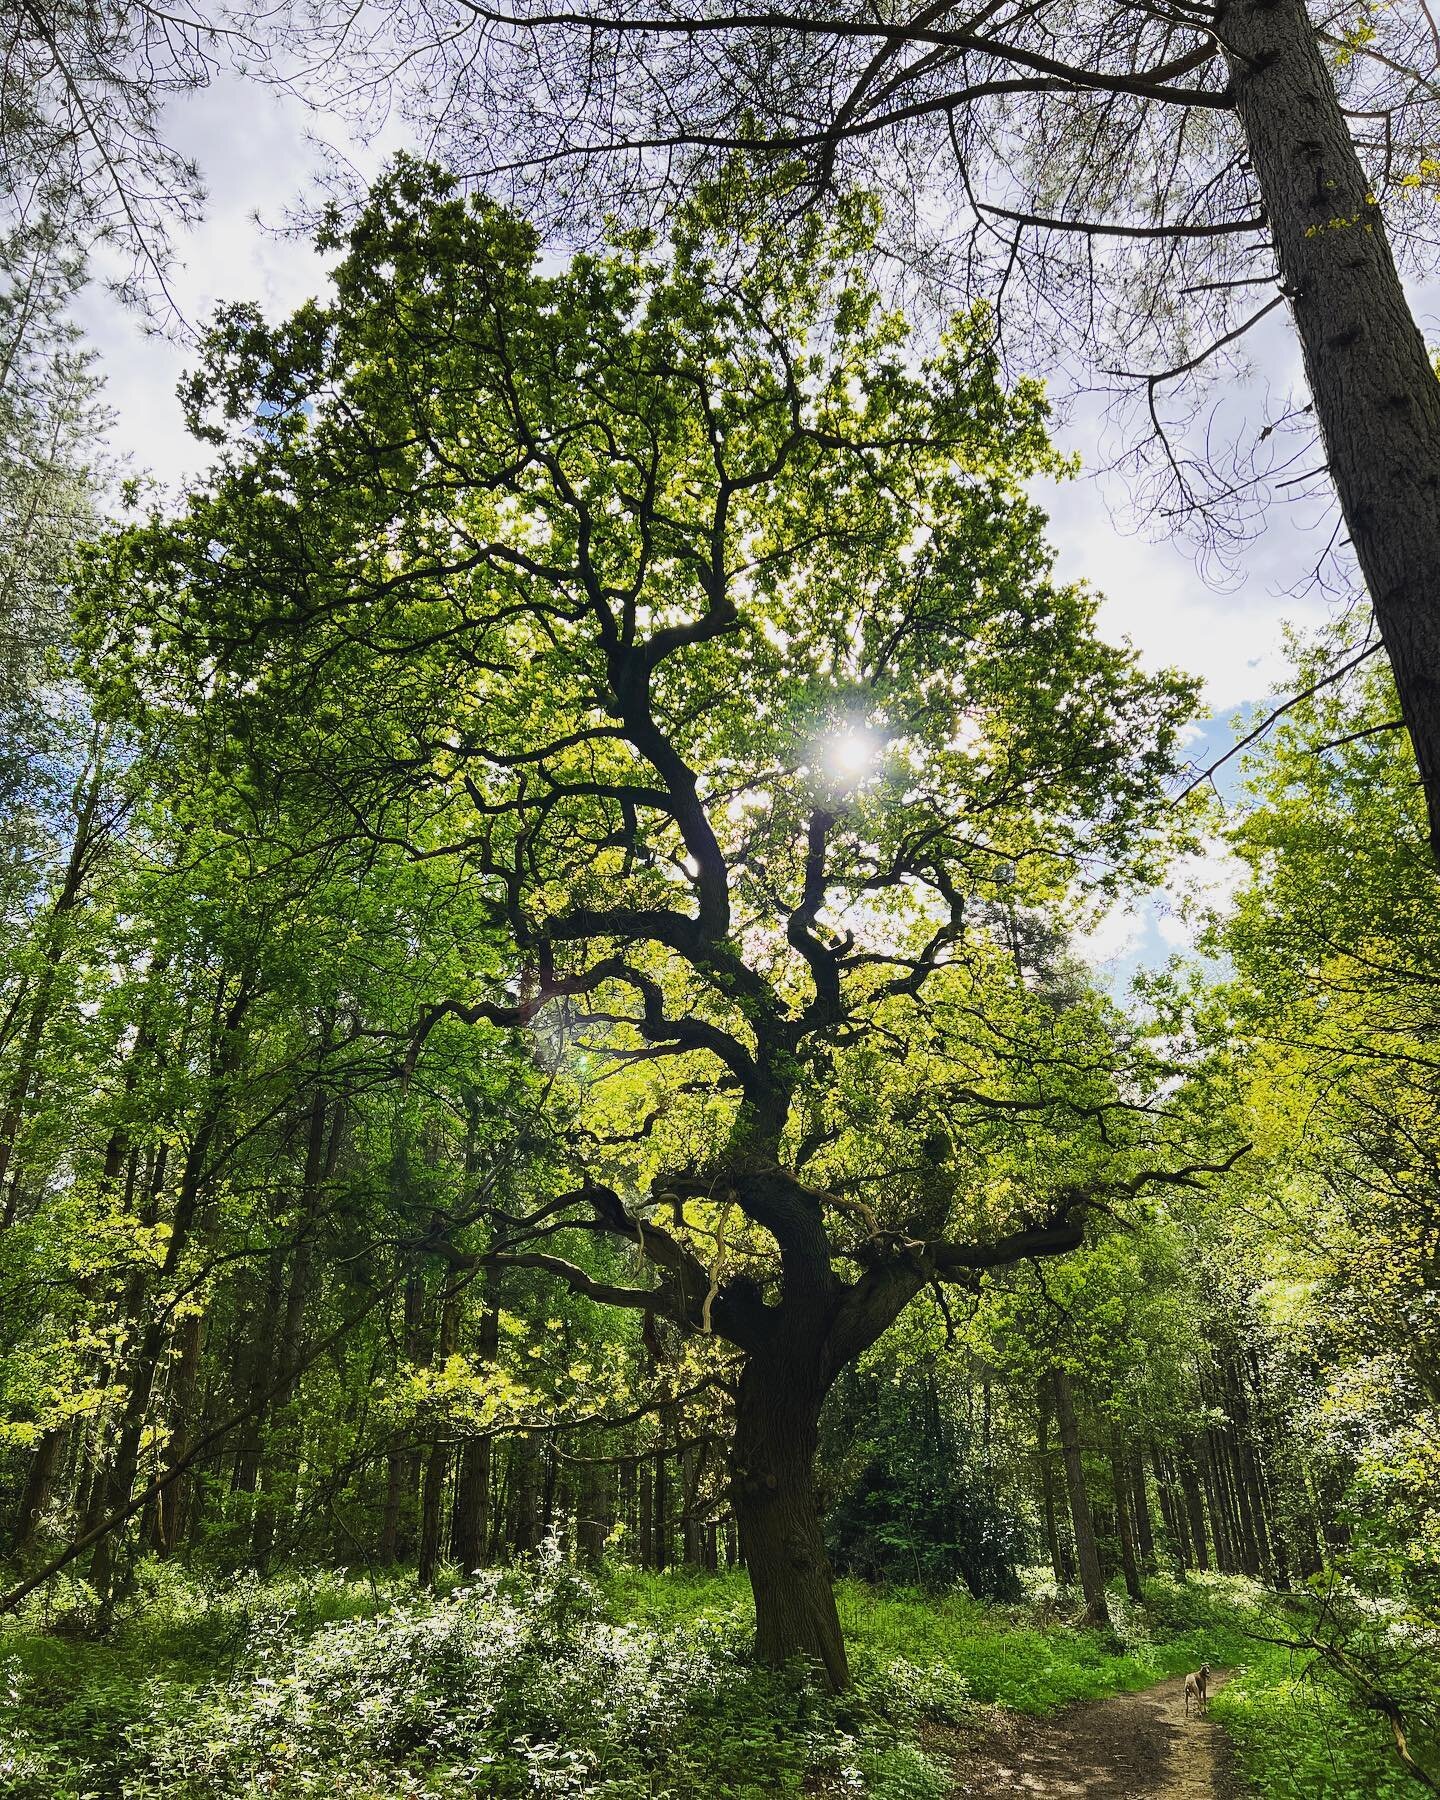 Just beautiful #spring #nature #oaktree #headspace